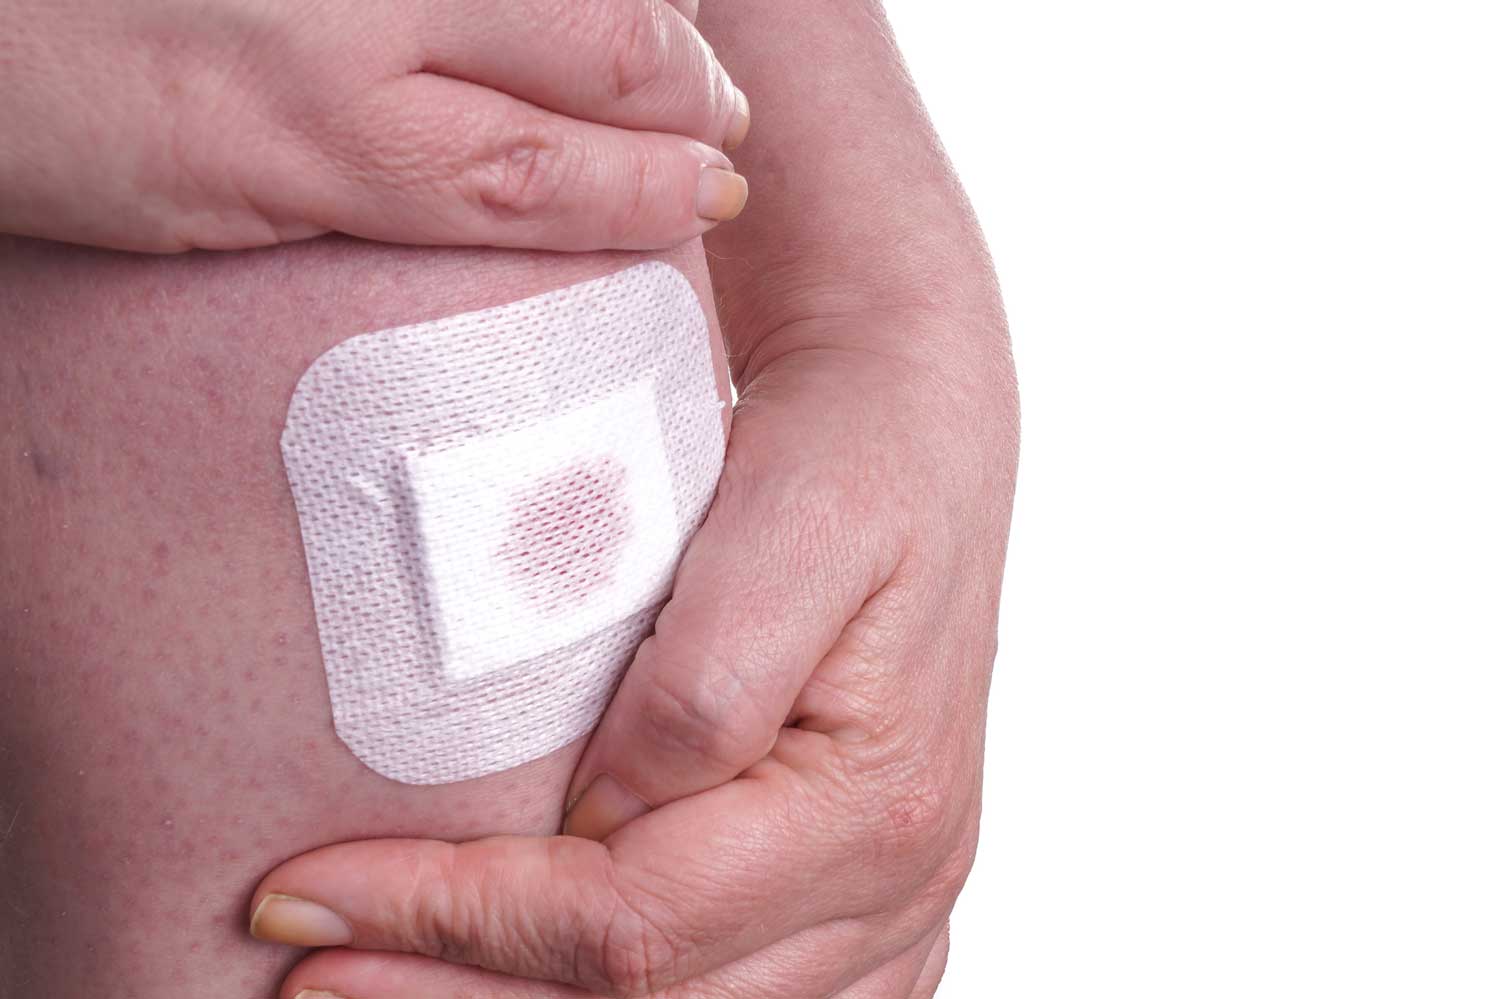 Before You Bandage: How to Properly Clean a Wound | BAND-AID® Brand